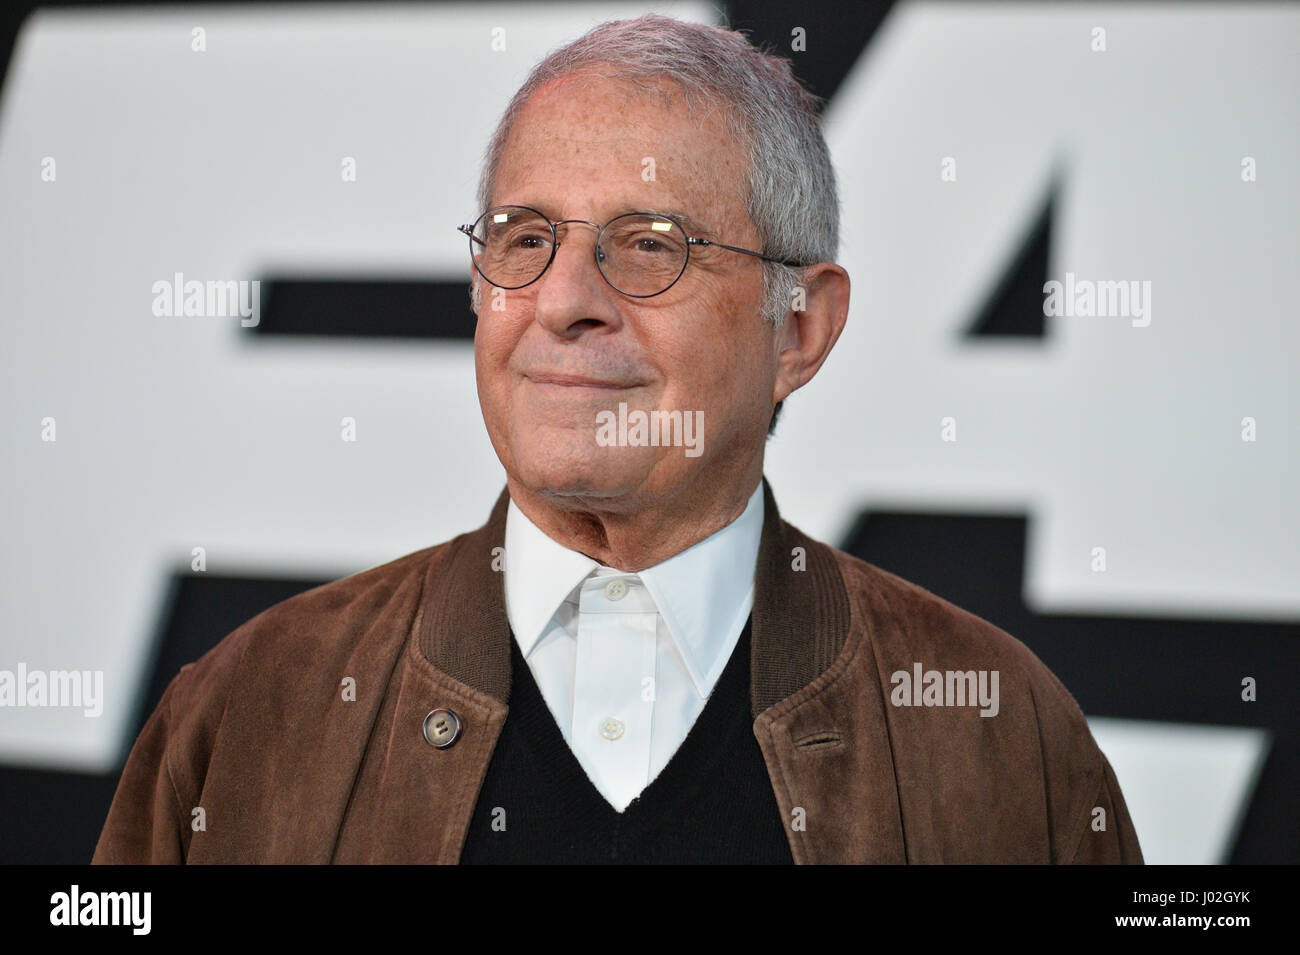 New York, USA. 8th April, 2017. Ron Meyer (President & CEO of Universal Studios) attends 'The Fate Of The Furious' New York Premiere at Radio City Music Hall on April 8, 2017 in New York City. credit: Erik Pendzich Credit: Erik Pendzich/Alamy Live News Stock Photo